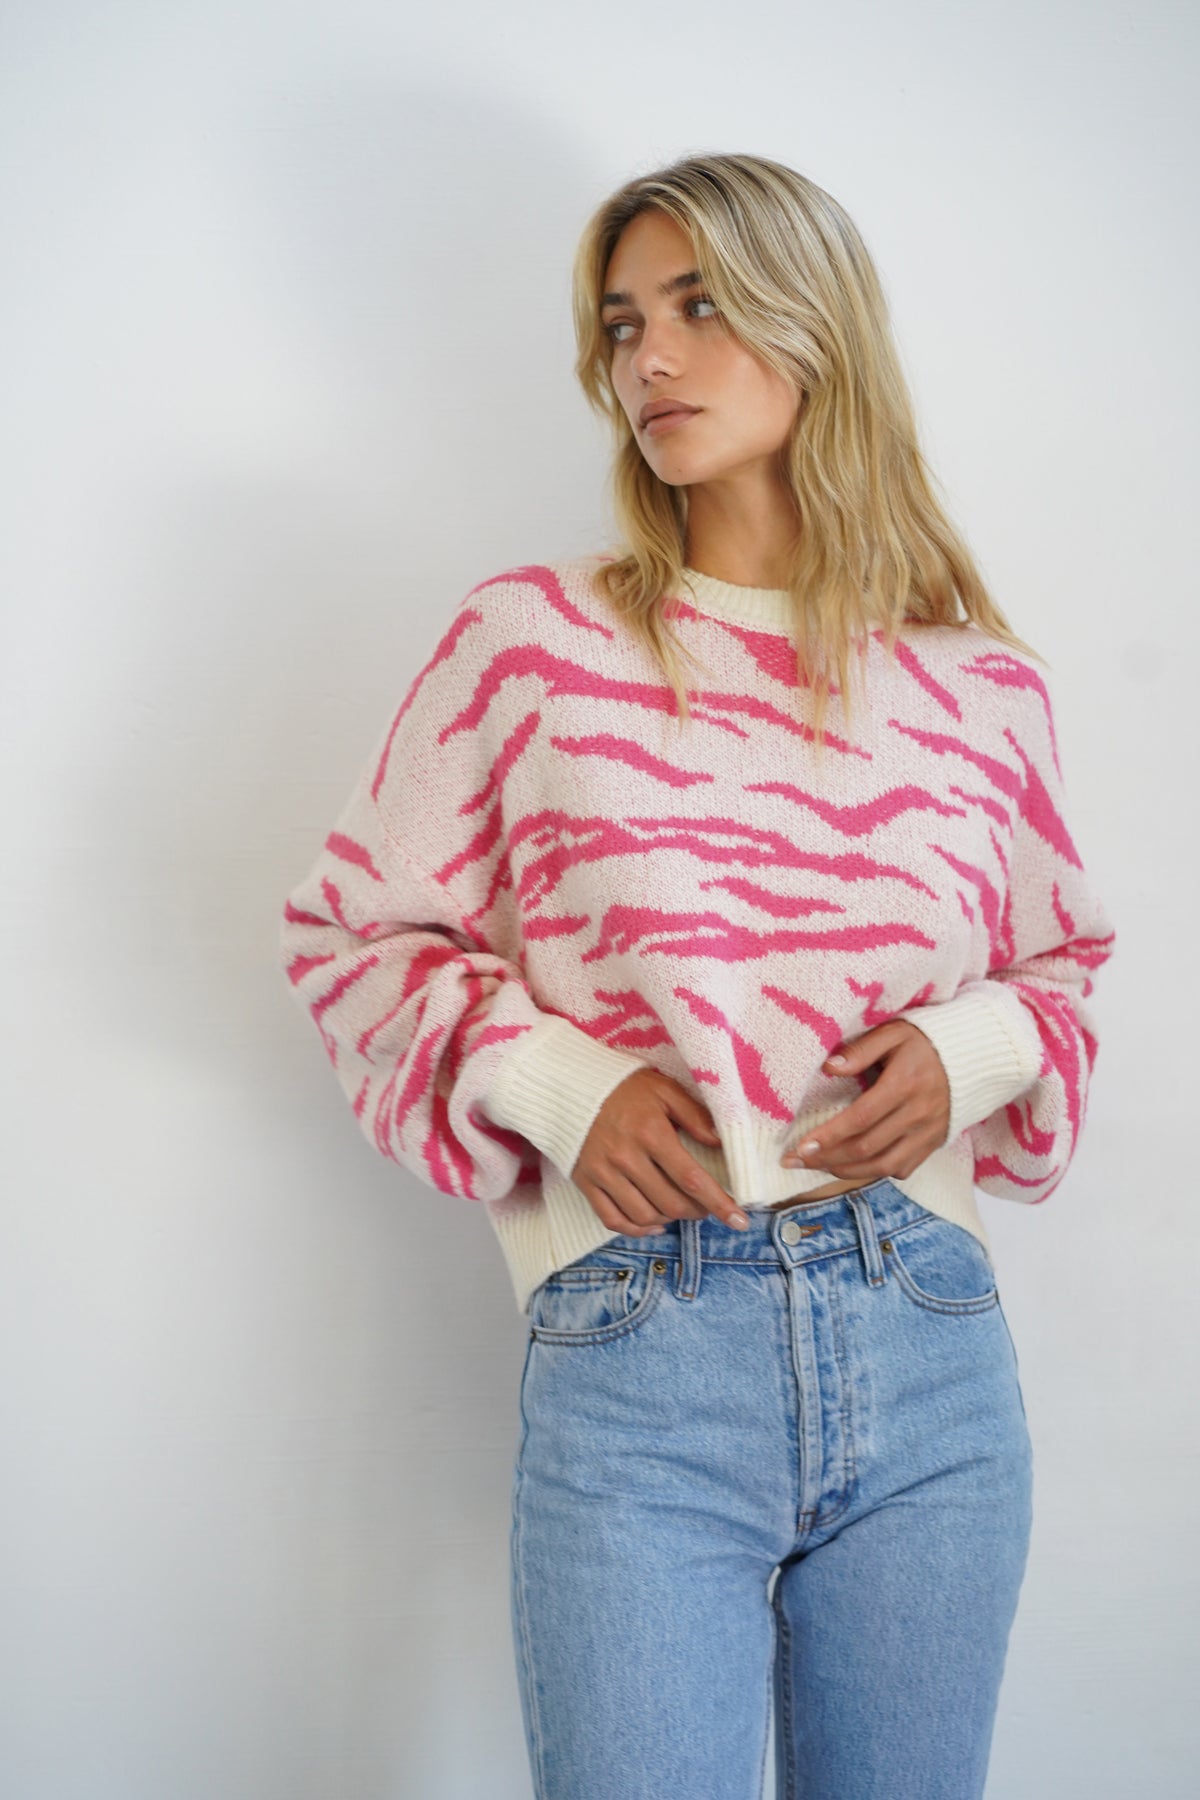 LNA Animal Jacquard Sweater in Ivory and Pink Animal